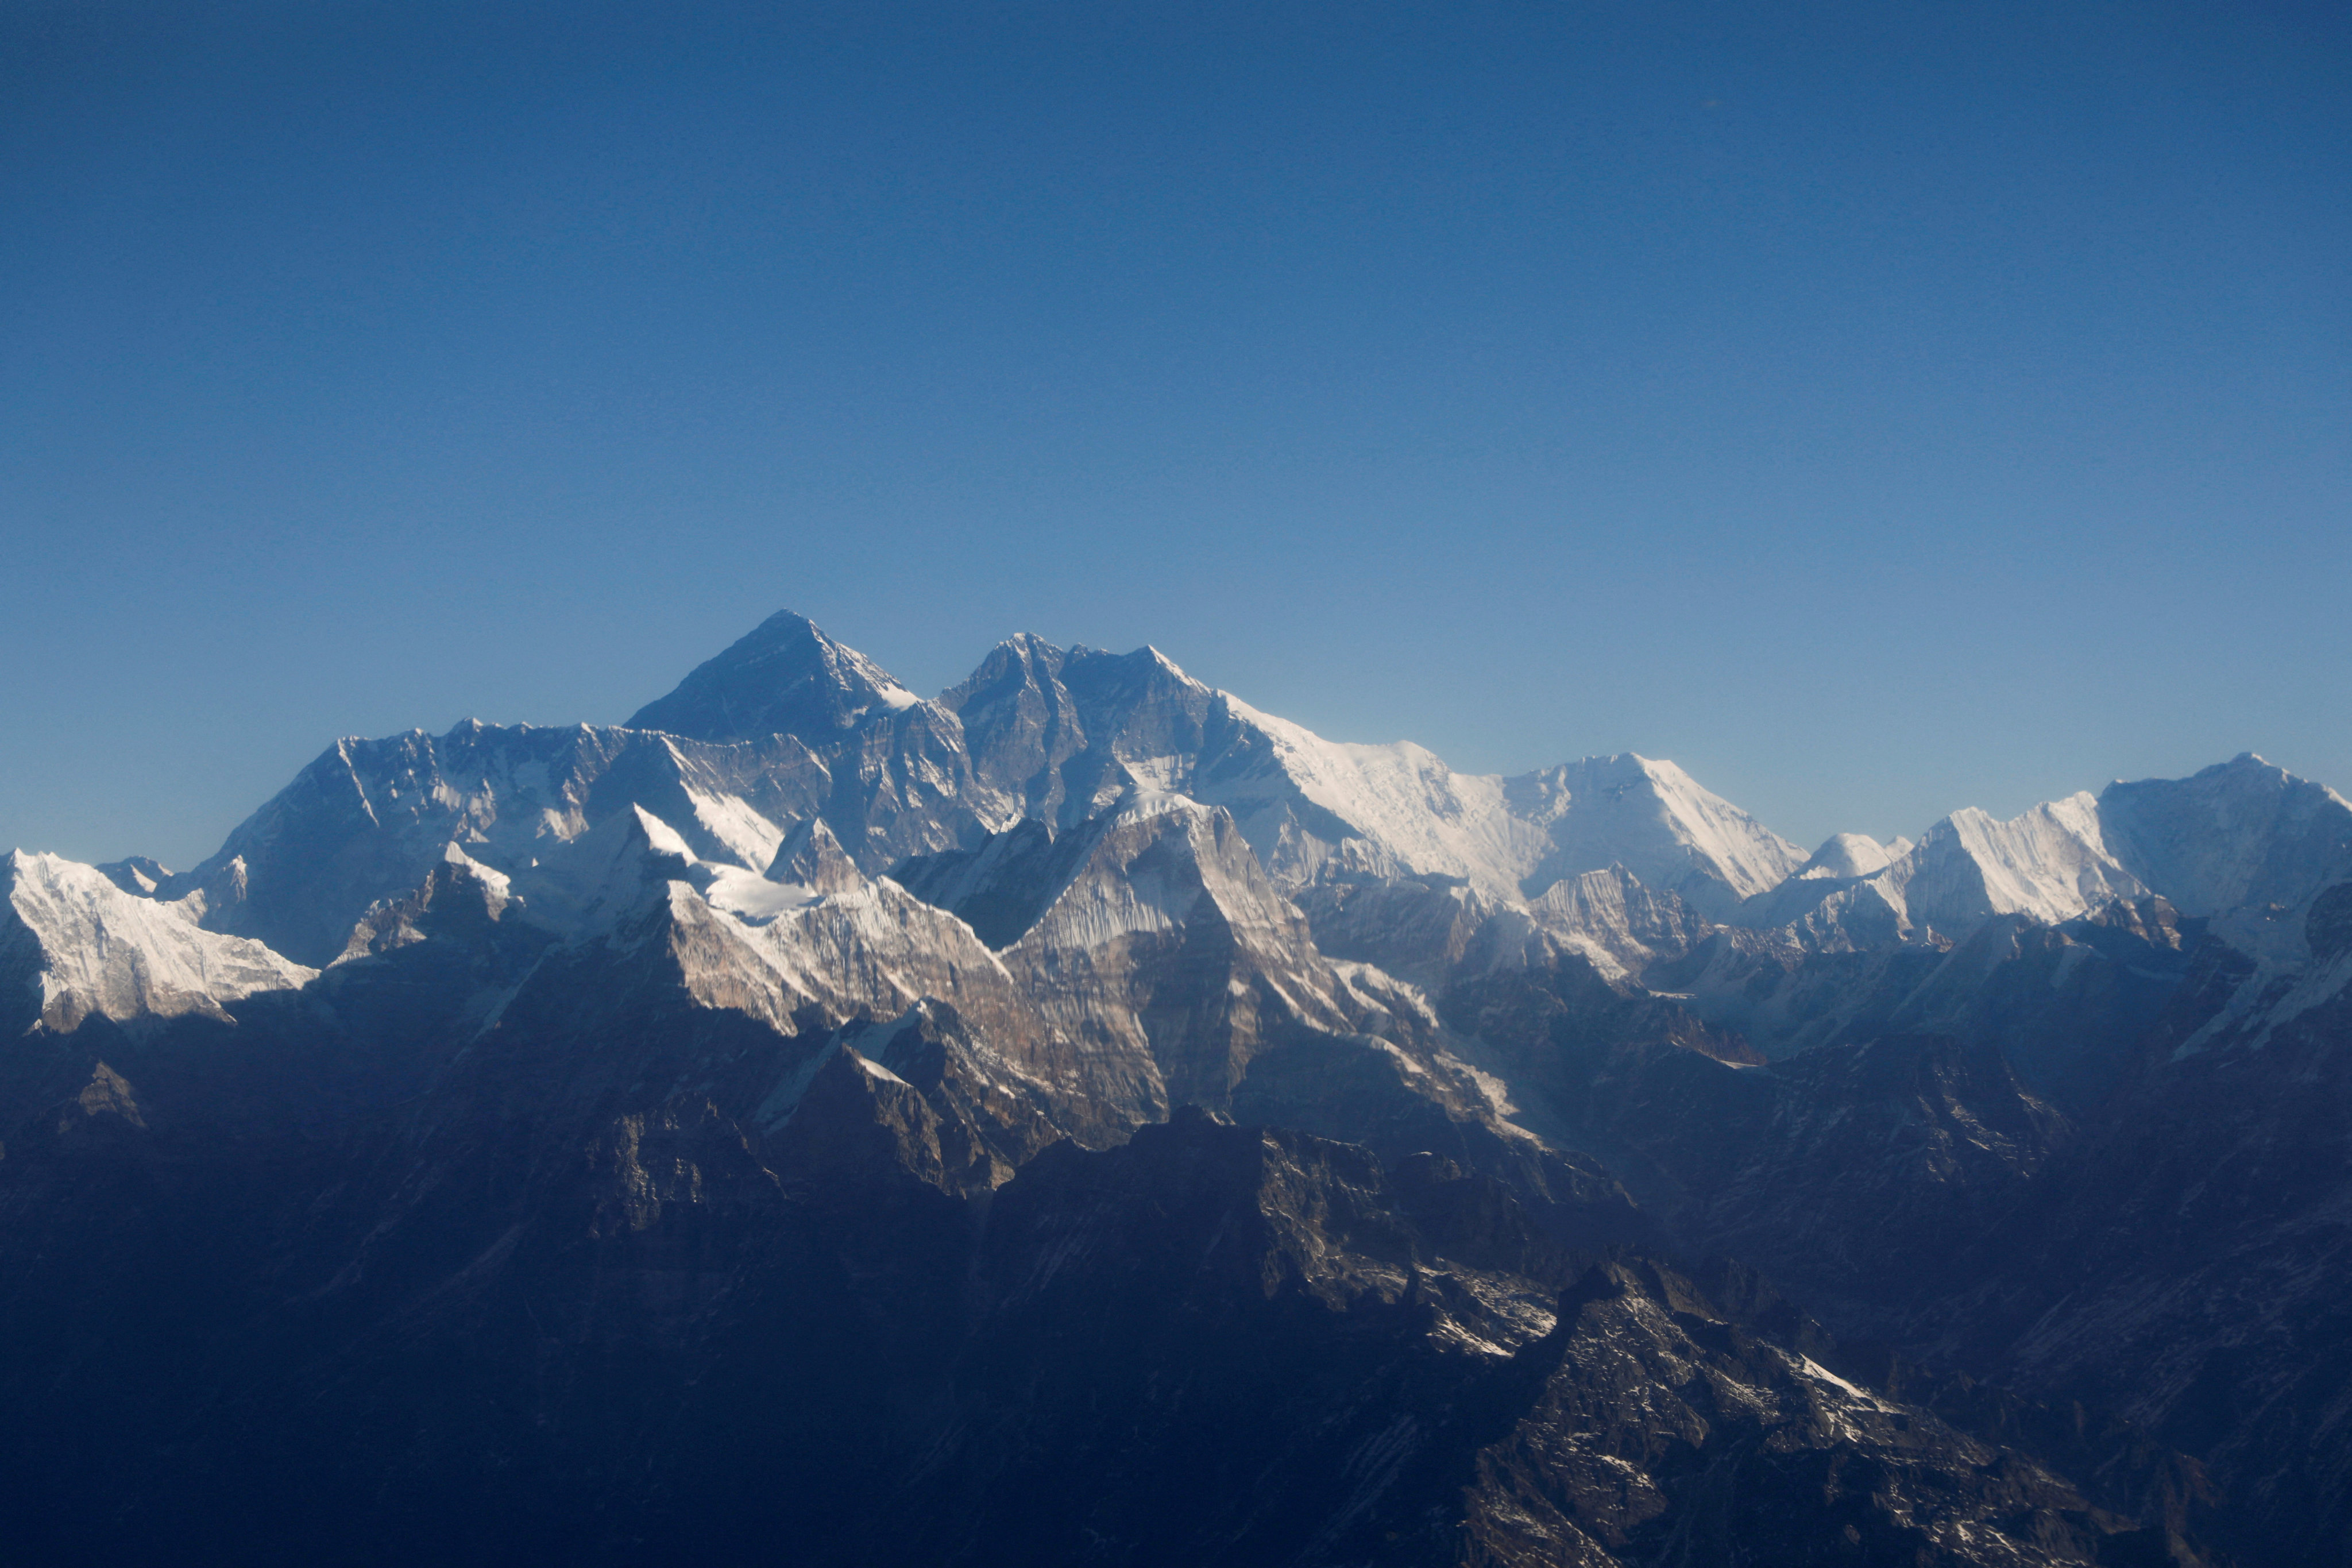 Mount Everest, the world highest mountain, and other Himalayan peaks are seen through an aircraft window during a flight over Nepal. Photo: Reuters